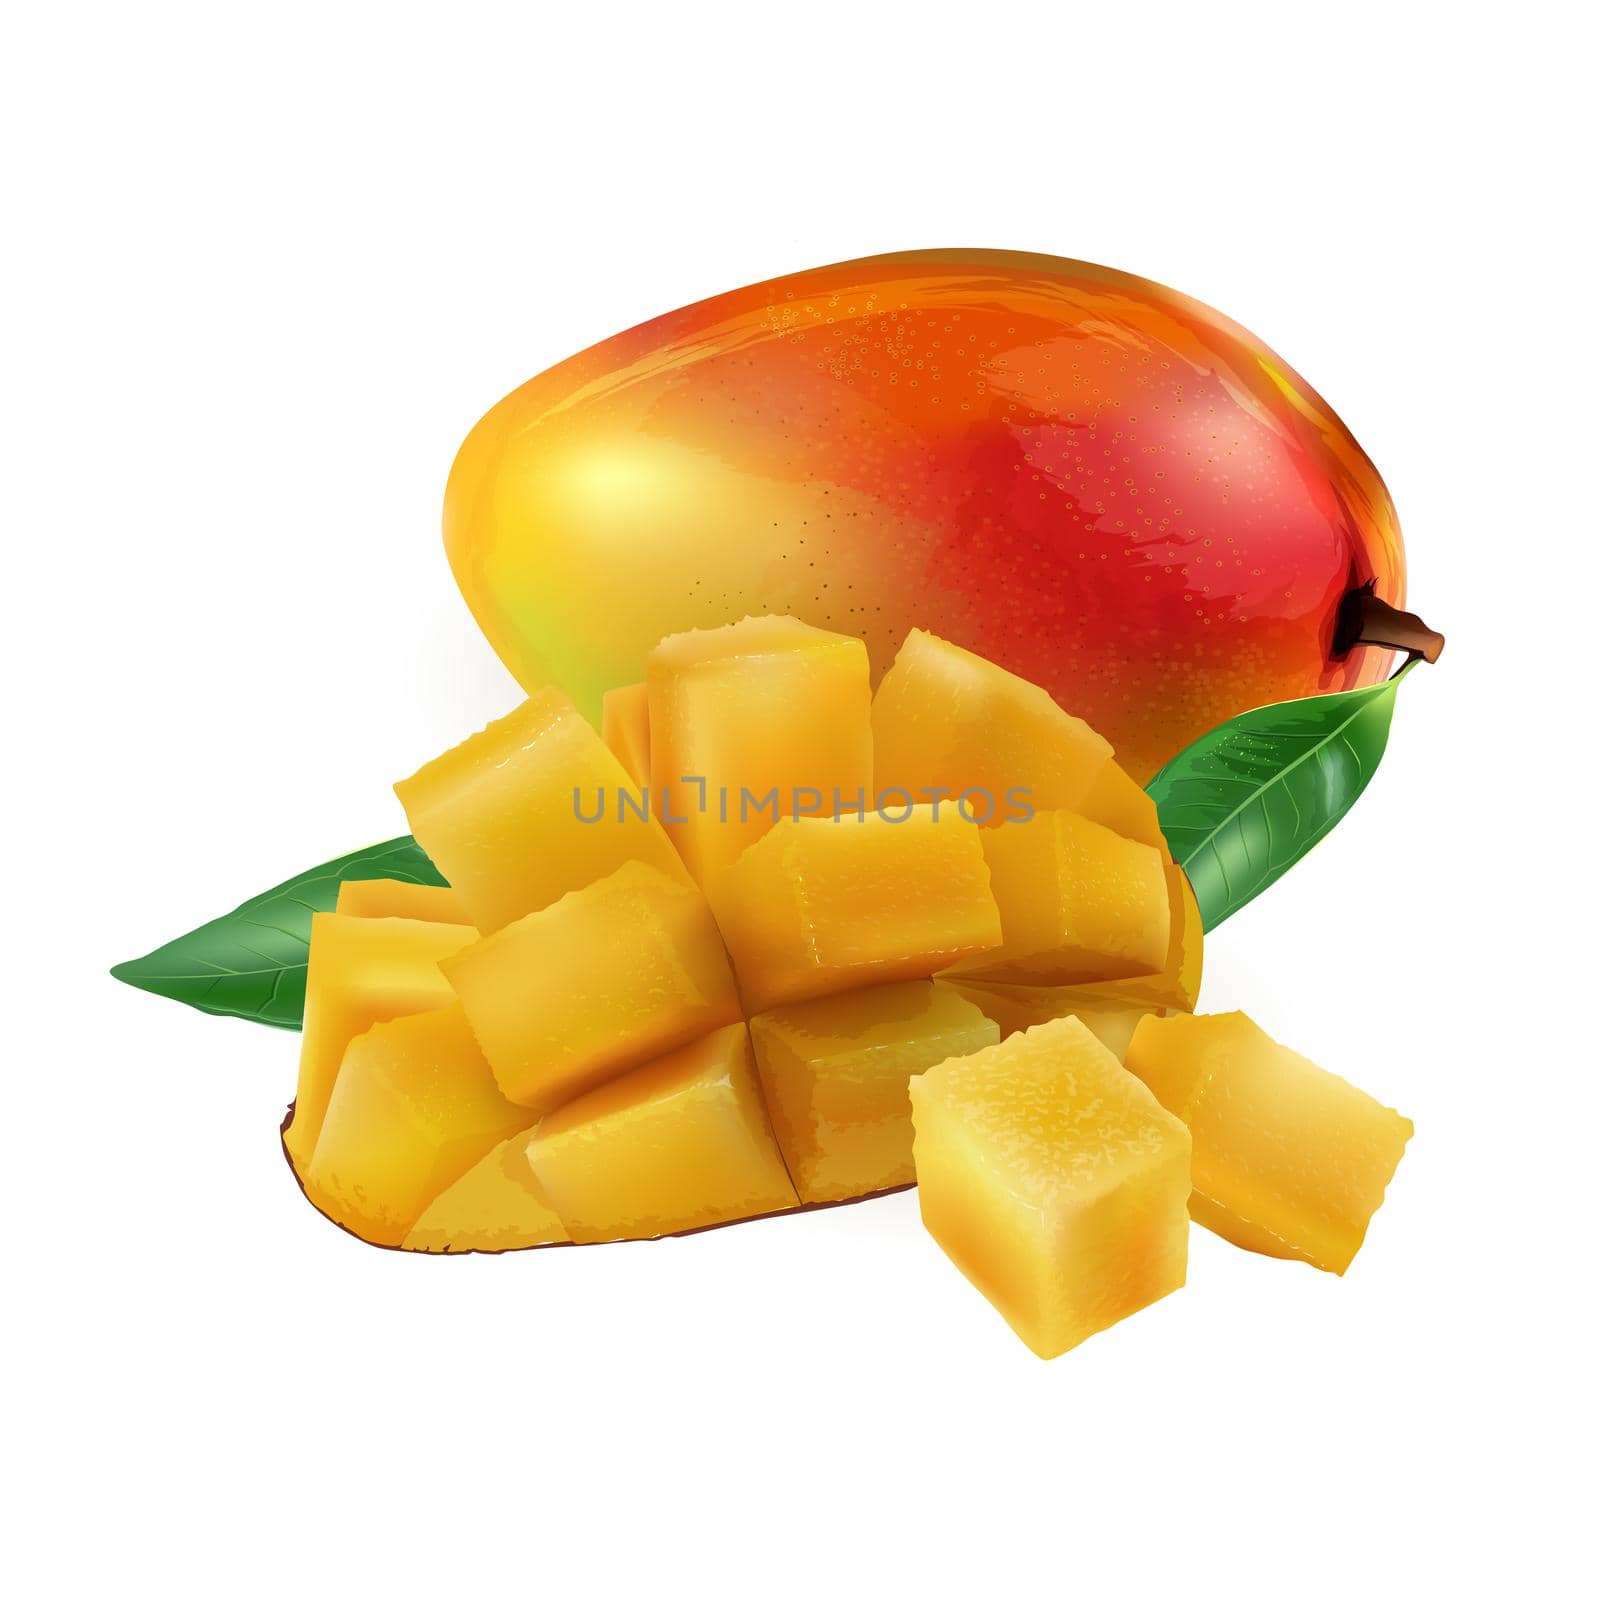 Whole and diced ripe mango. Realistic illustration on a white background.